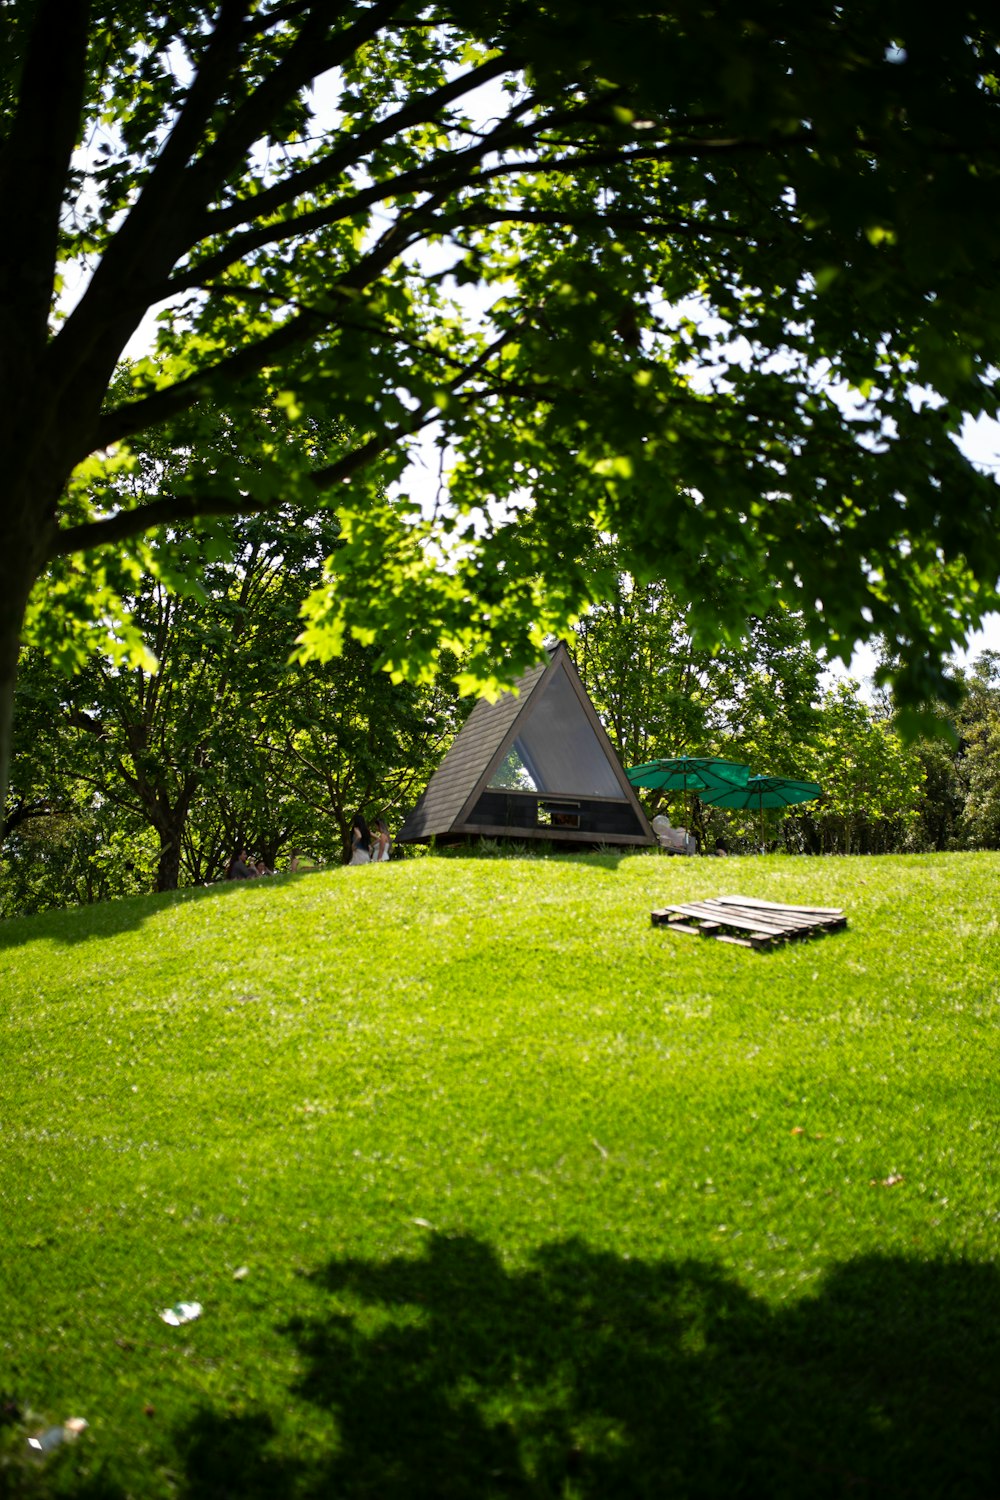 a tent in the middle of a grassy field